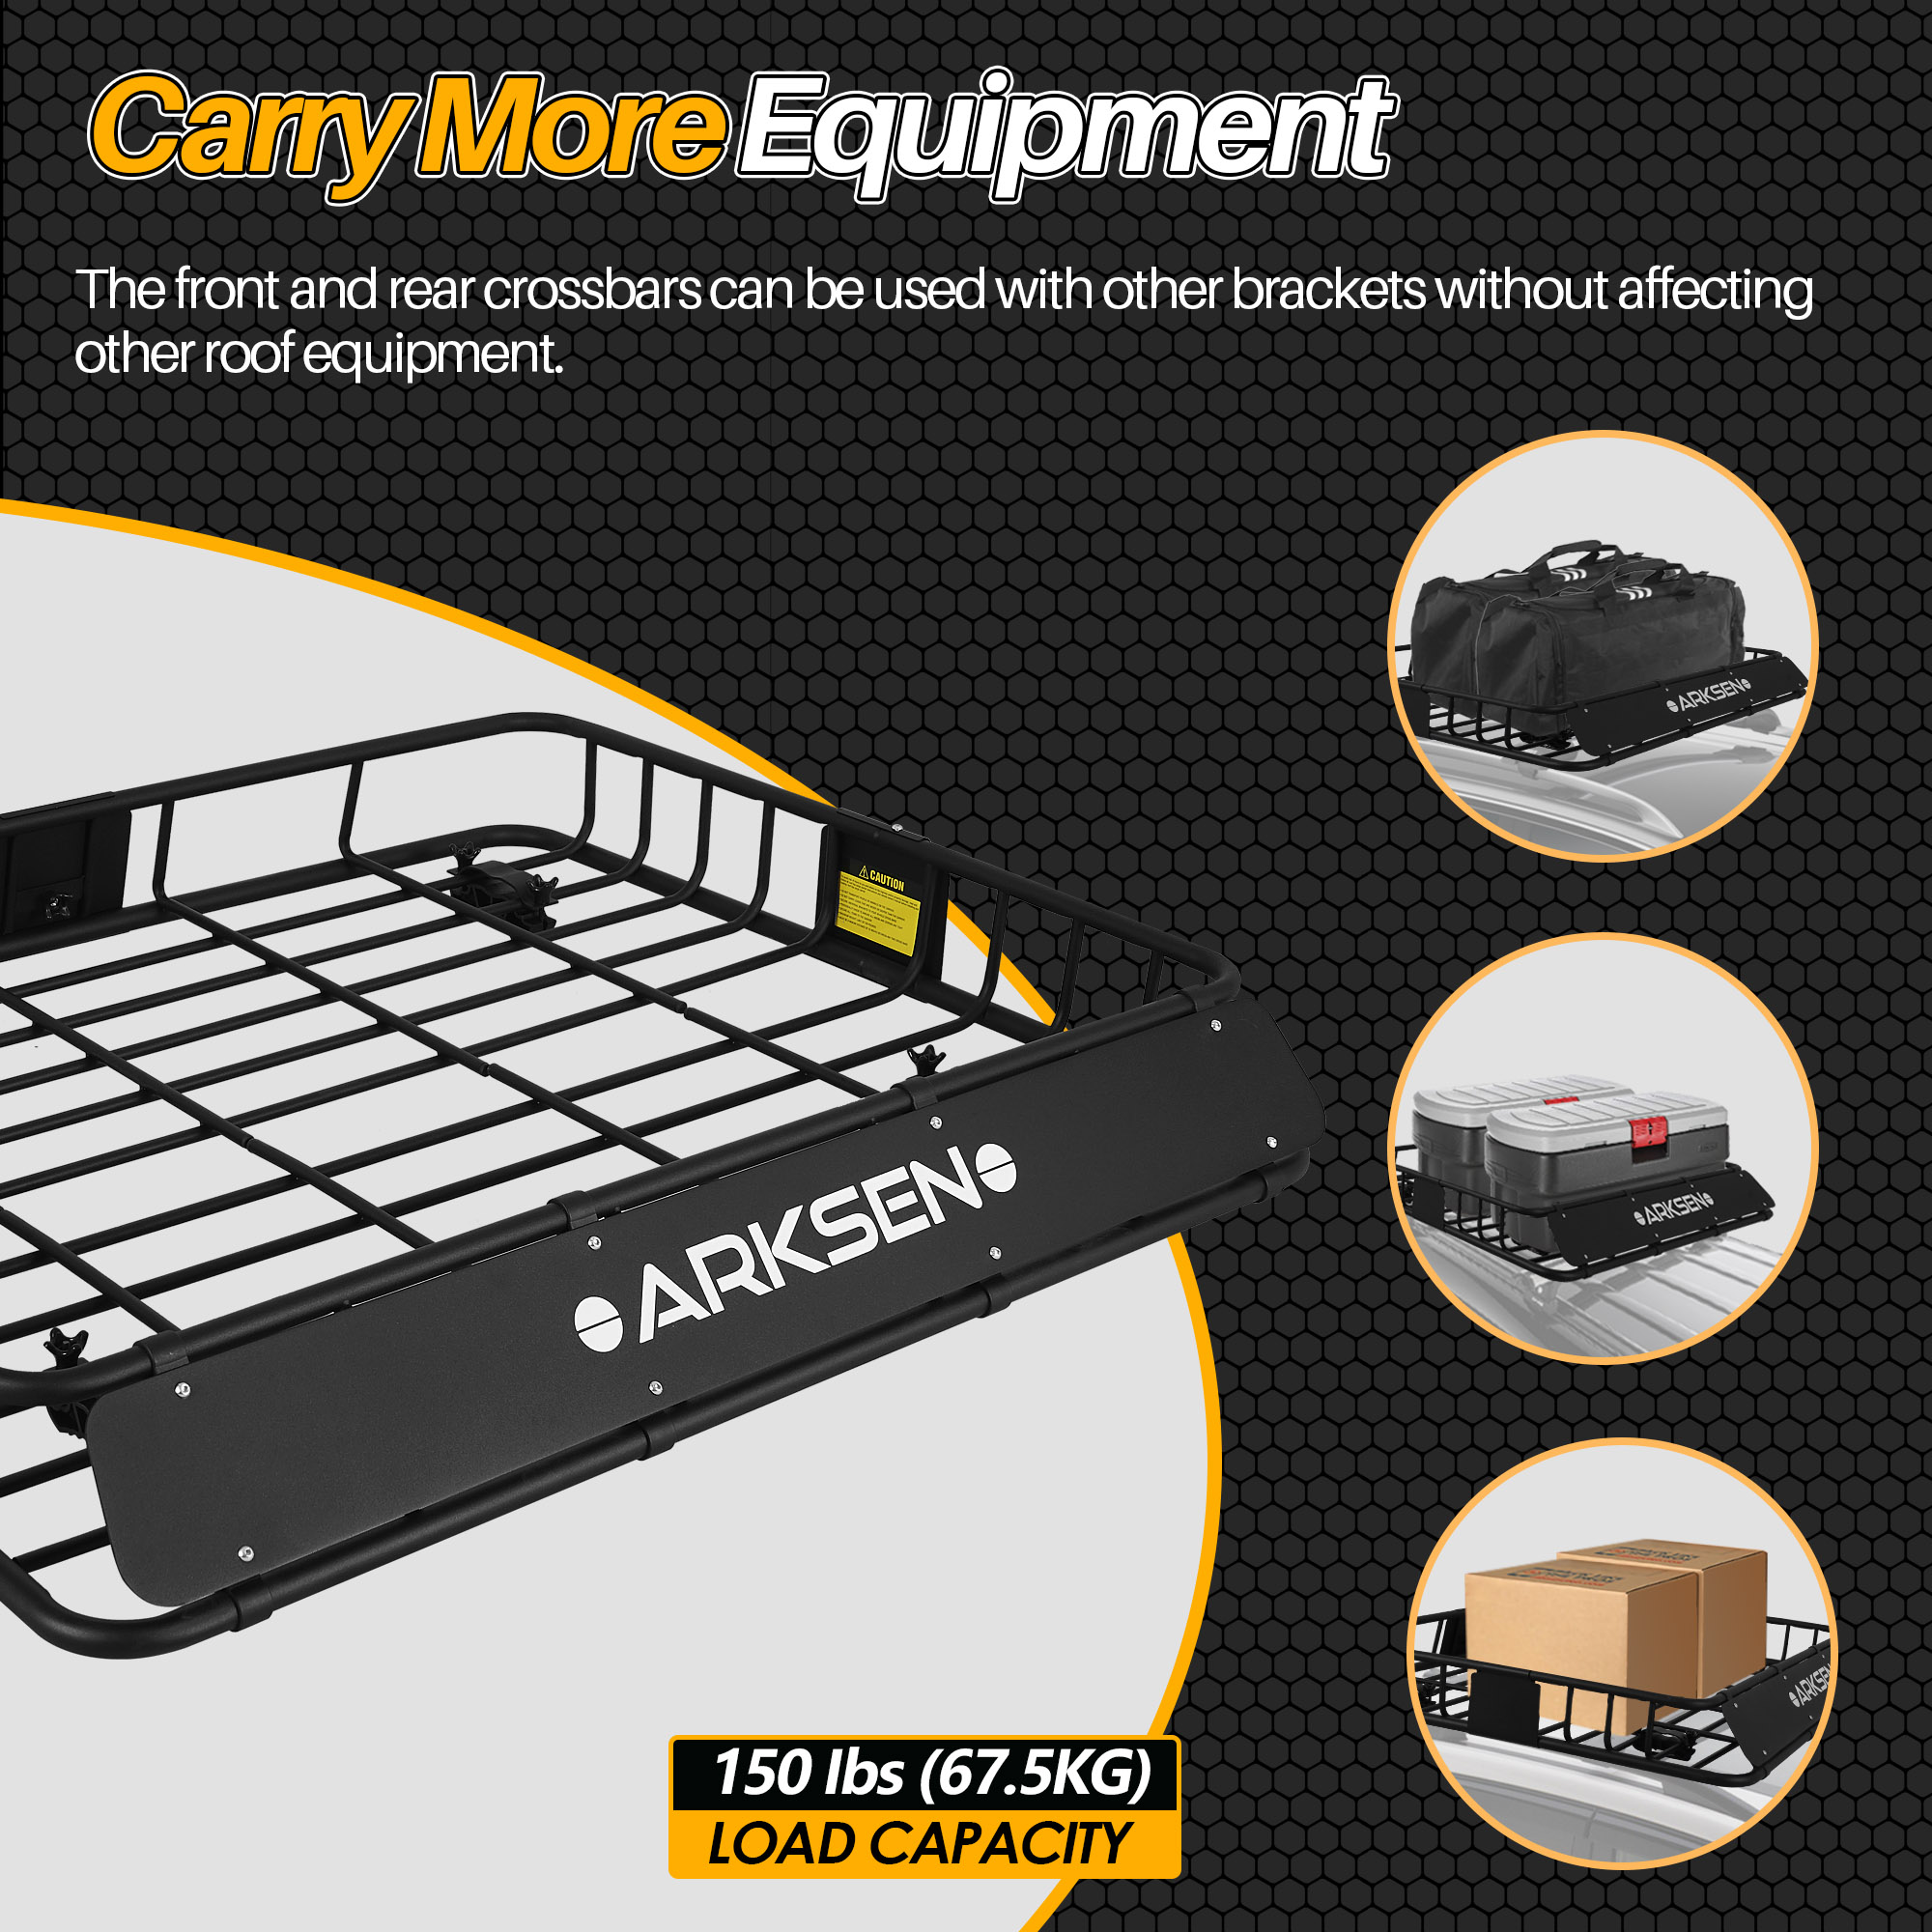 ARKSEN 43" x 50" x 6" Perfect-Wide Roof Rack Cargo Basket 150 lb. Capacity  Full-size SUV Top Luggage Holder Storage Carrier, Black